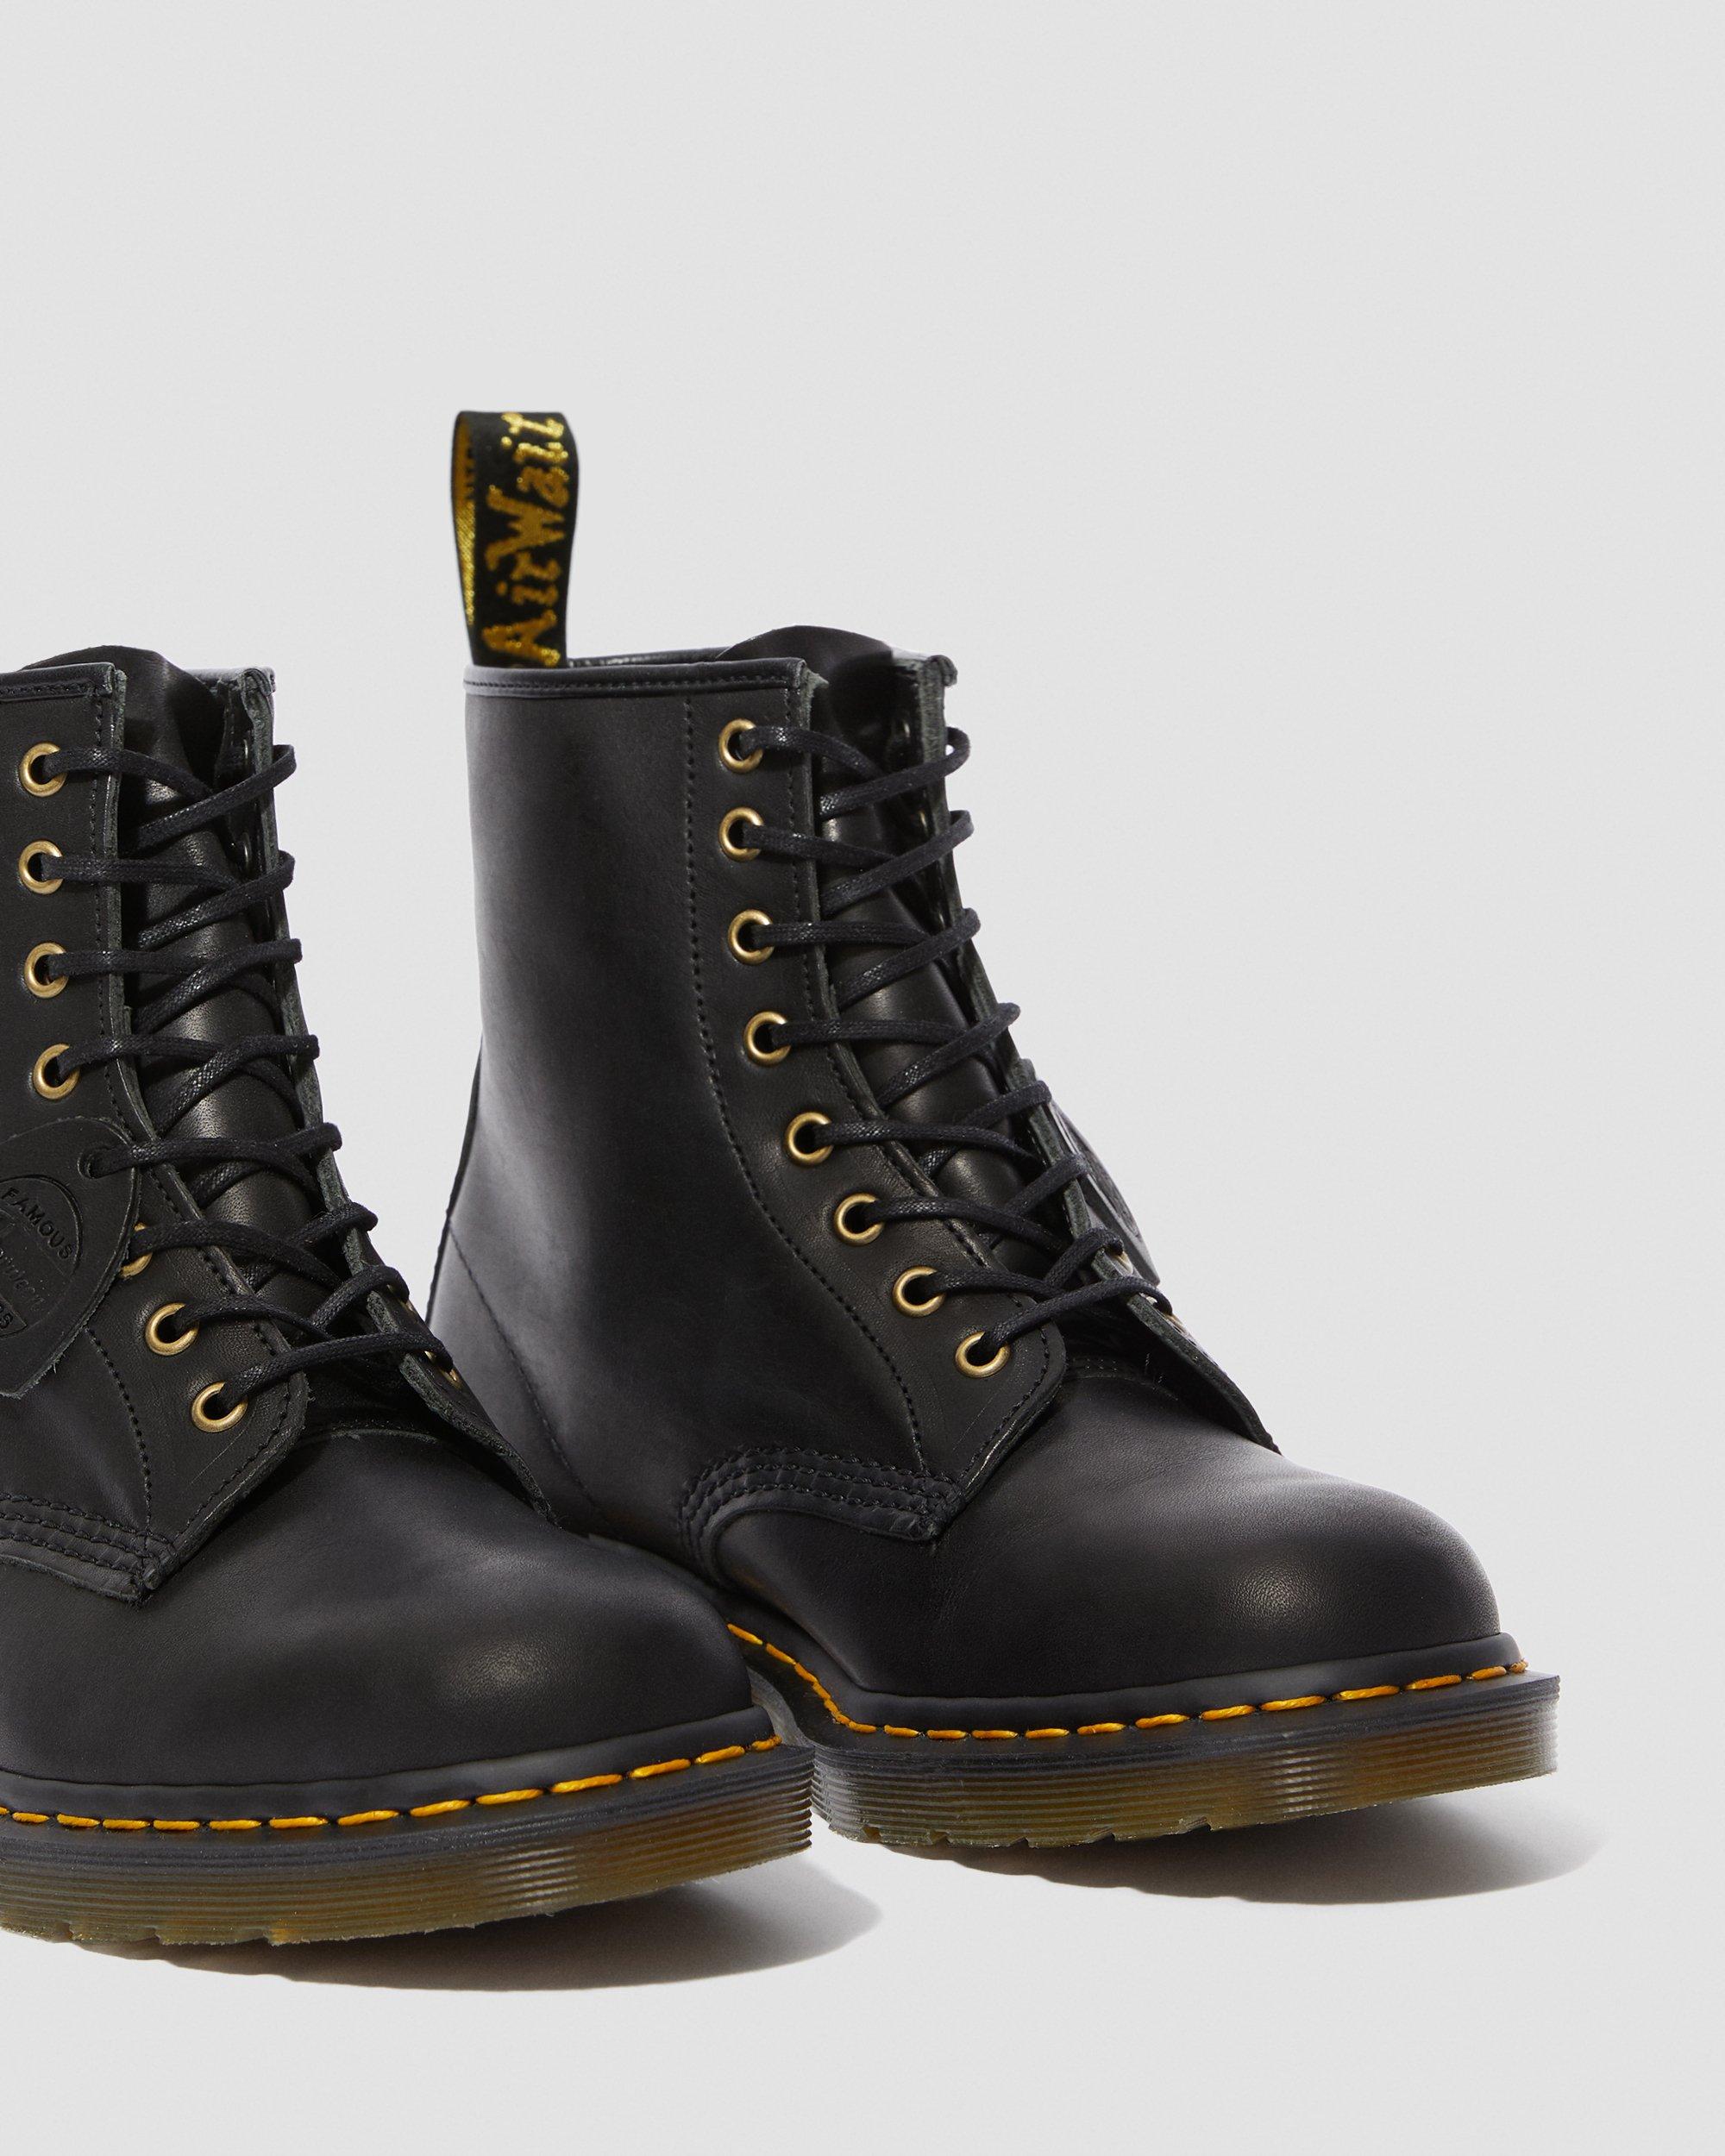 1460 Made In England Horween Leather Boots | Dr. Martens